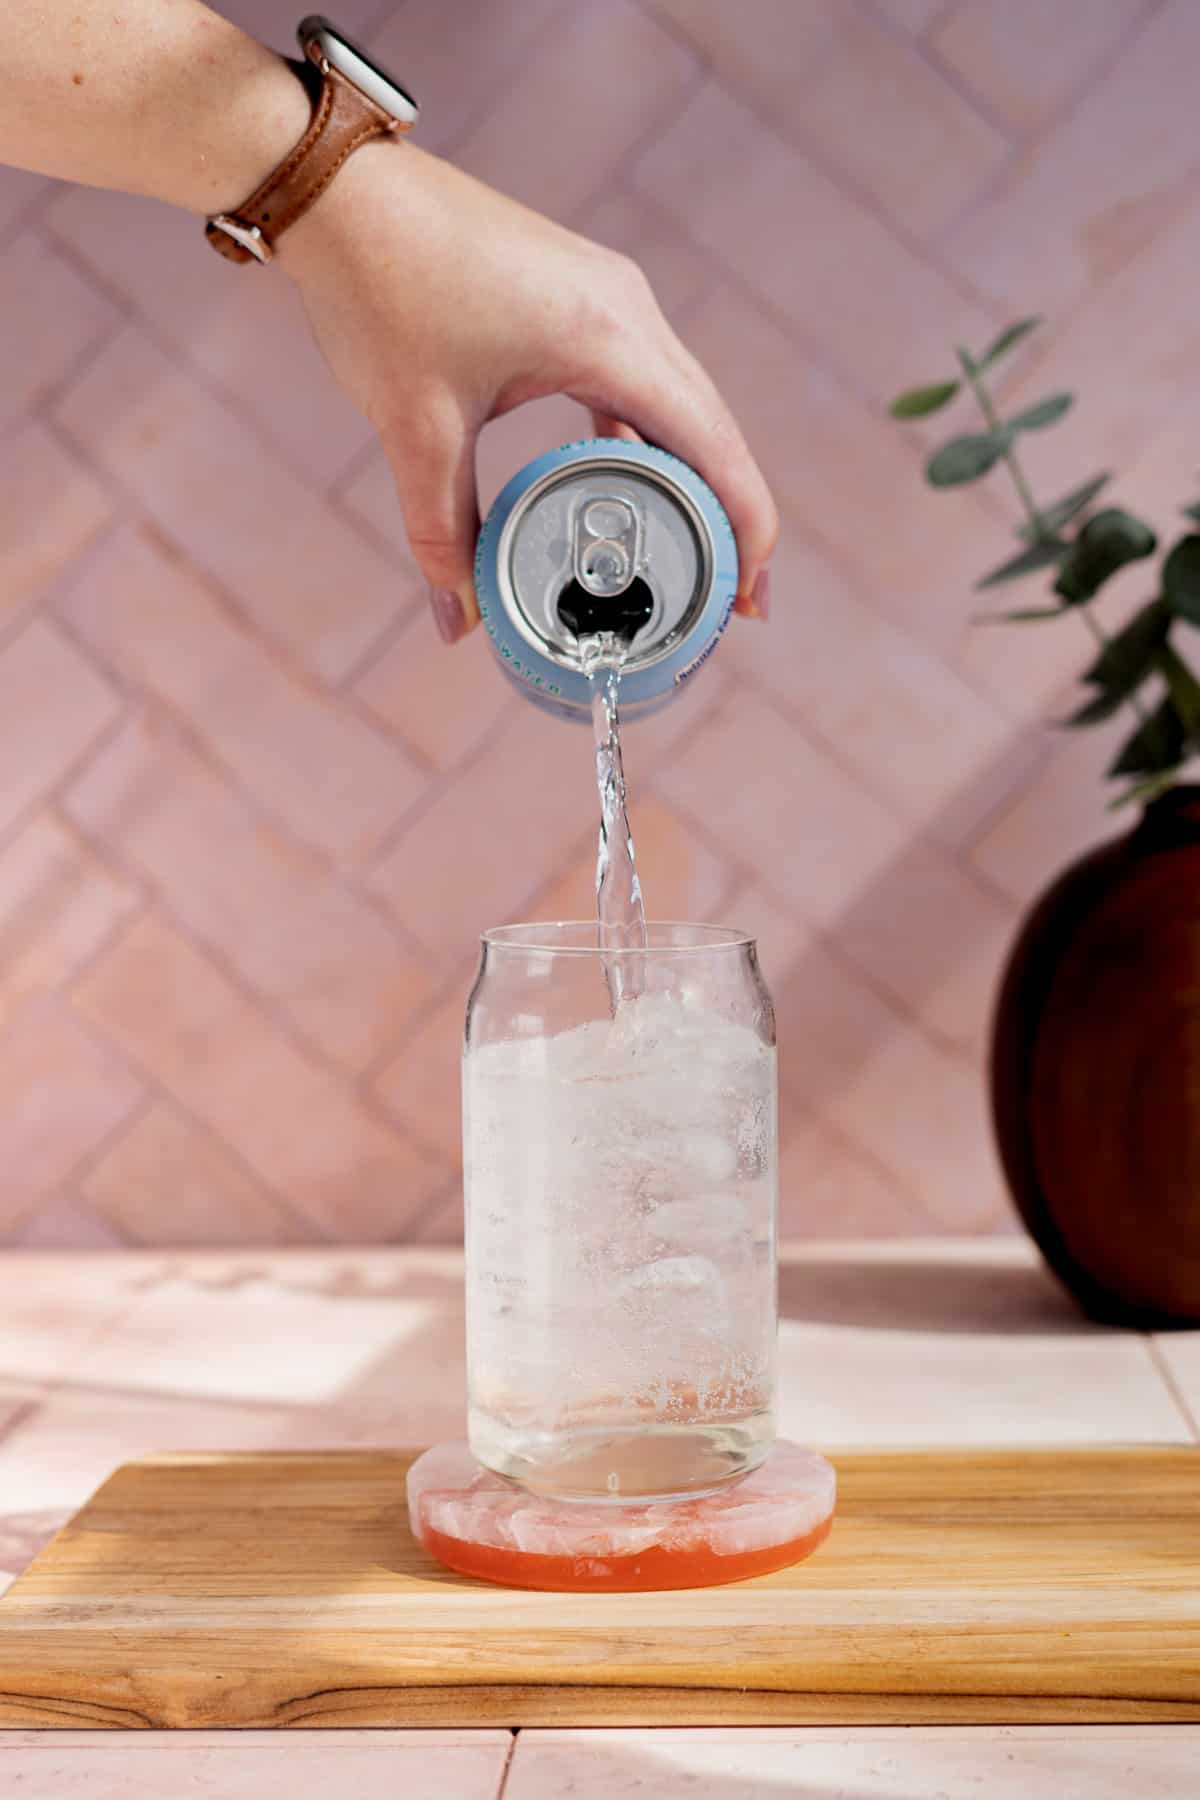 A hand from out of frame is pouring soda water into a soda can glass filled with ice.